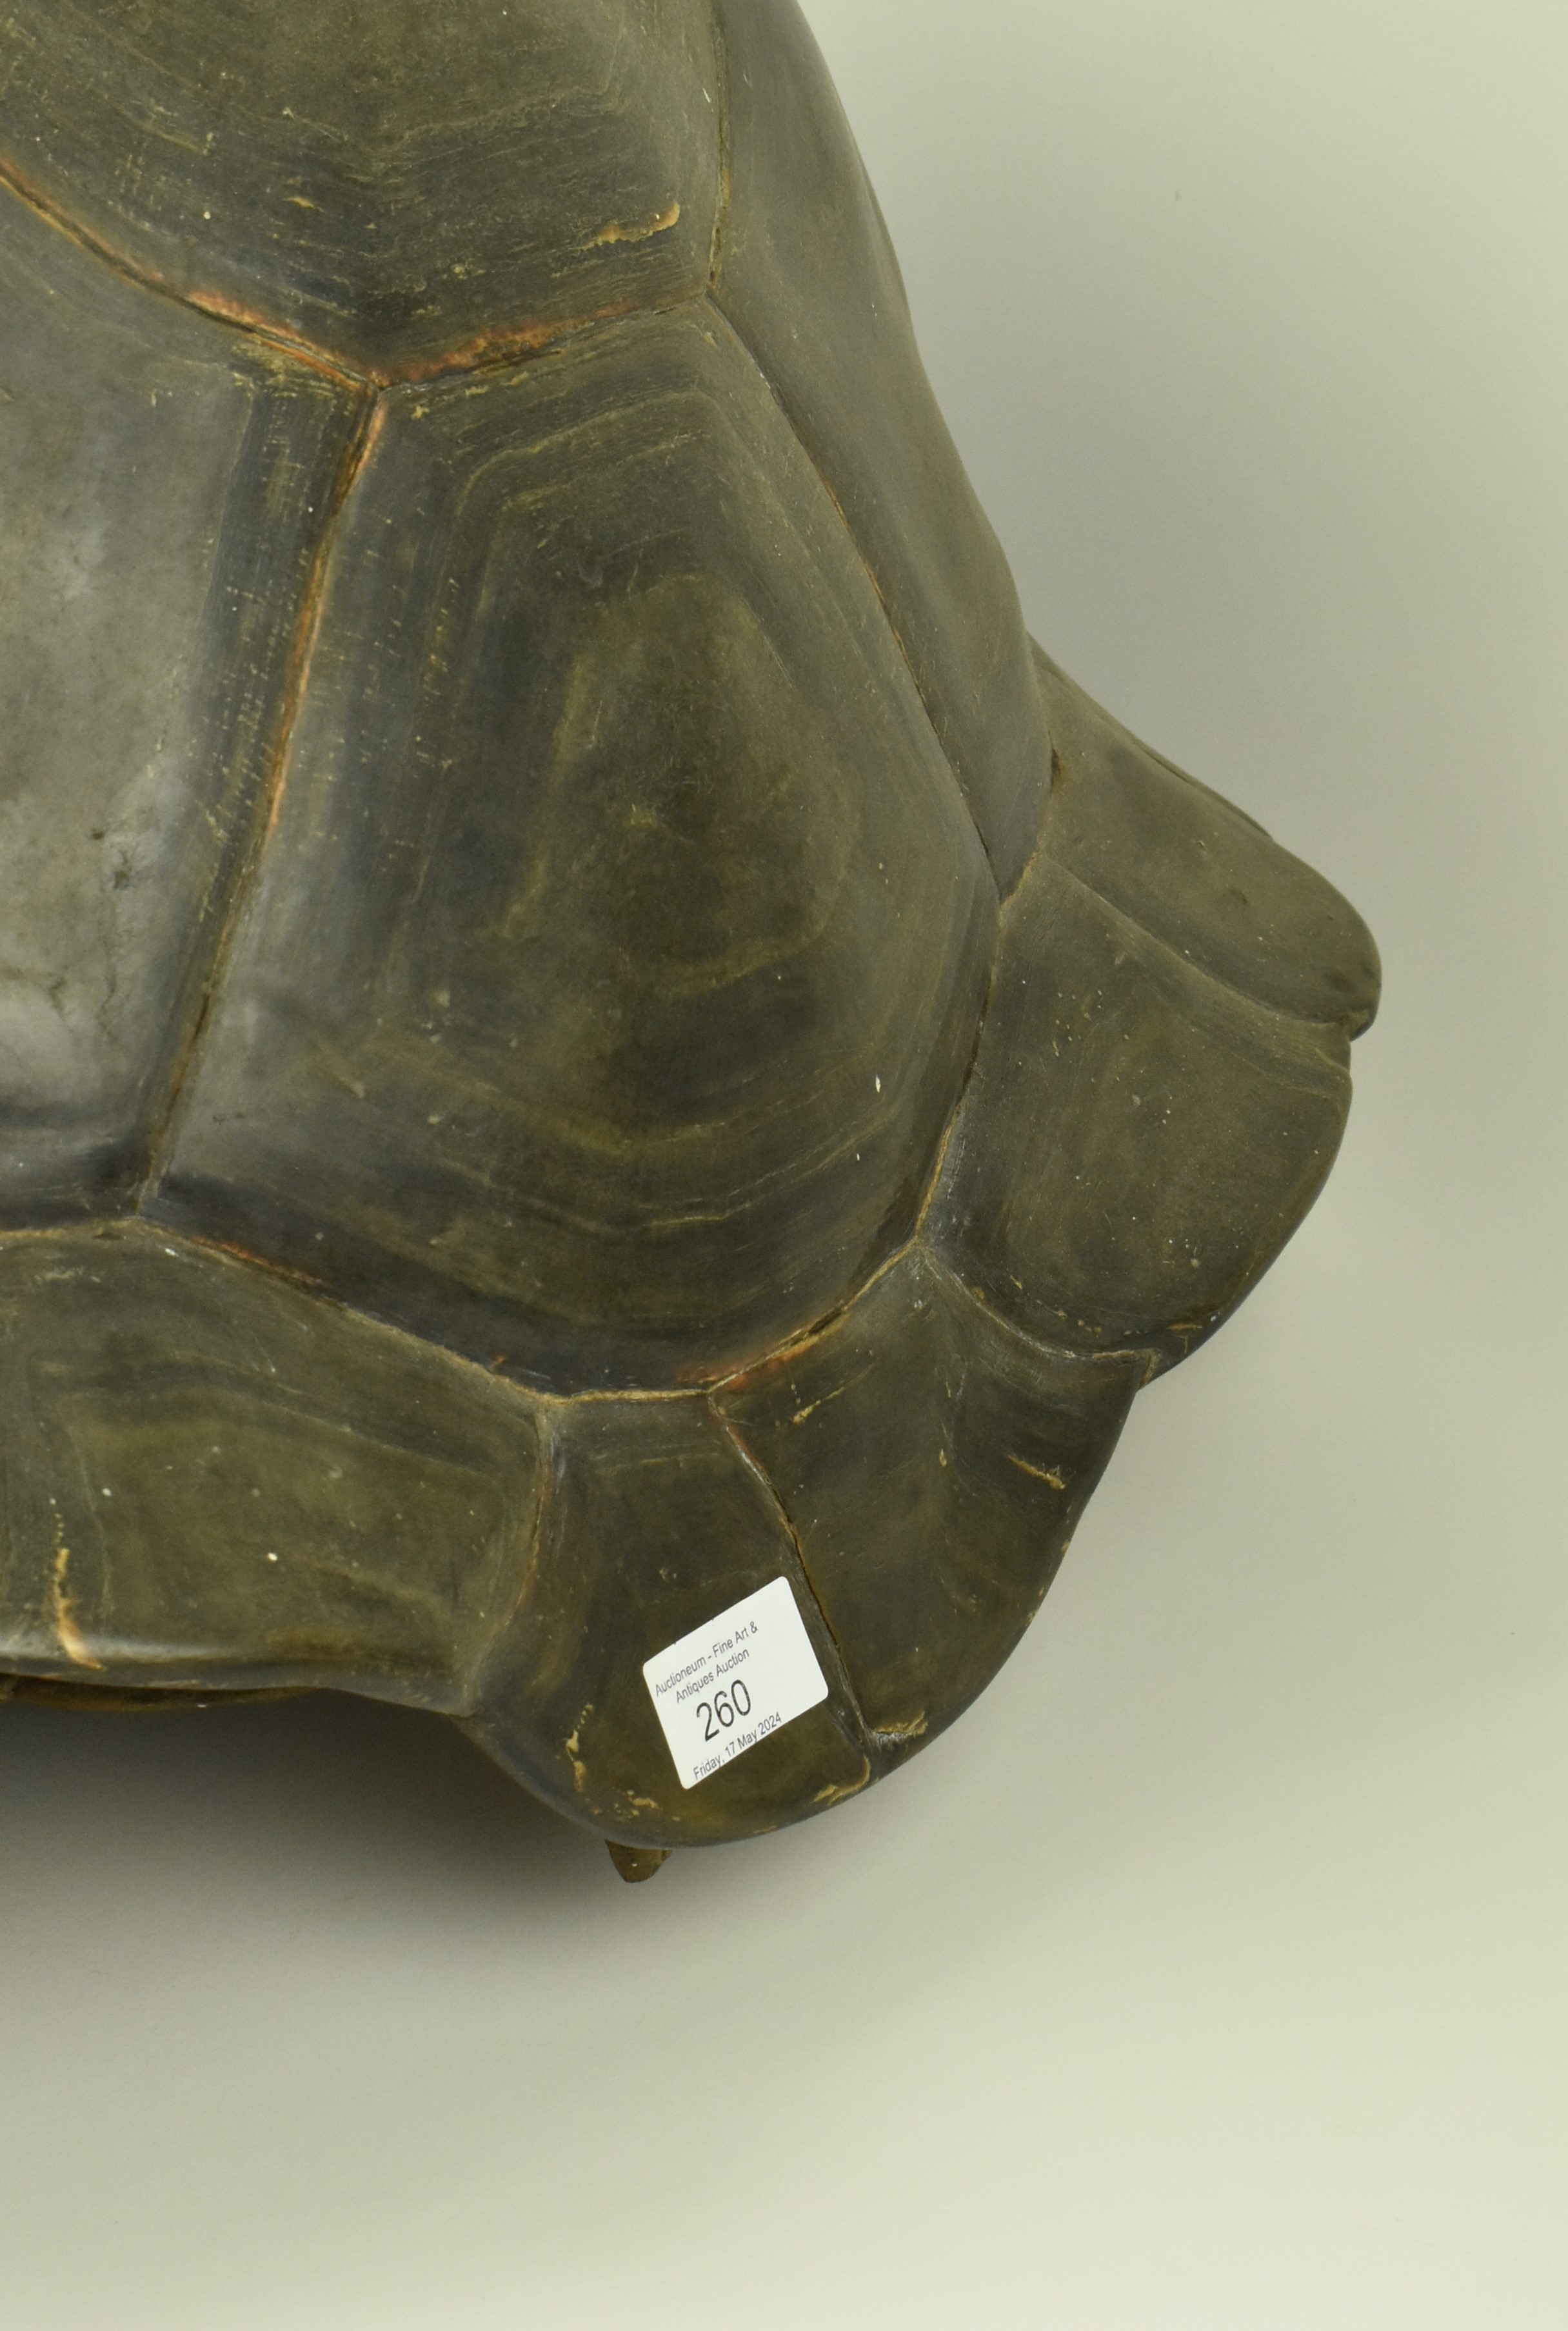 19TH CENTURY TAXIDERMY GALAPAGOS GIANT TURTLE - Image 6 of 11